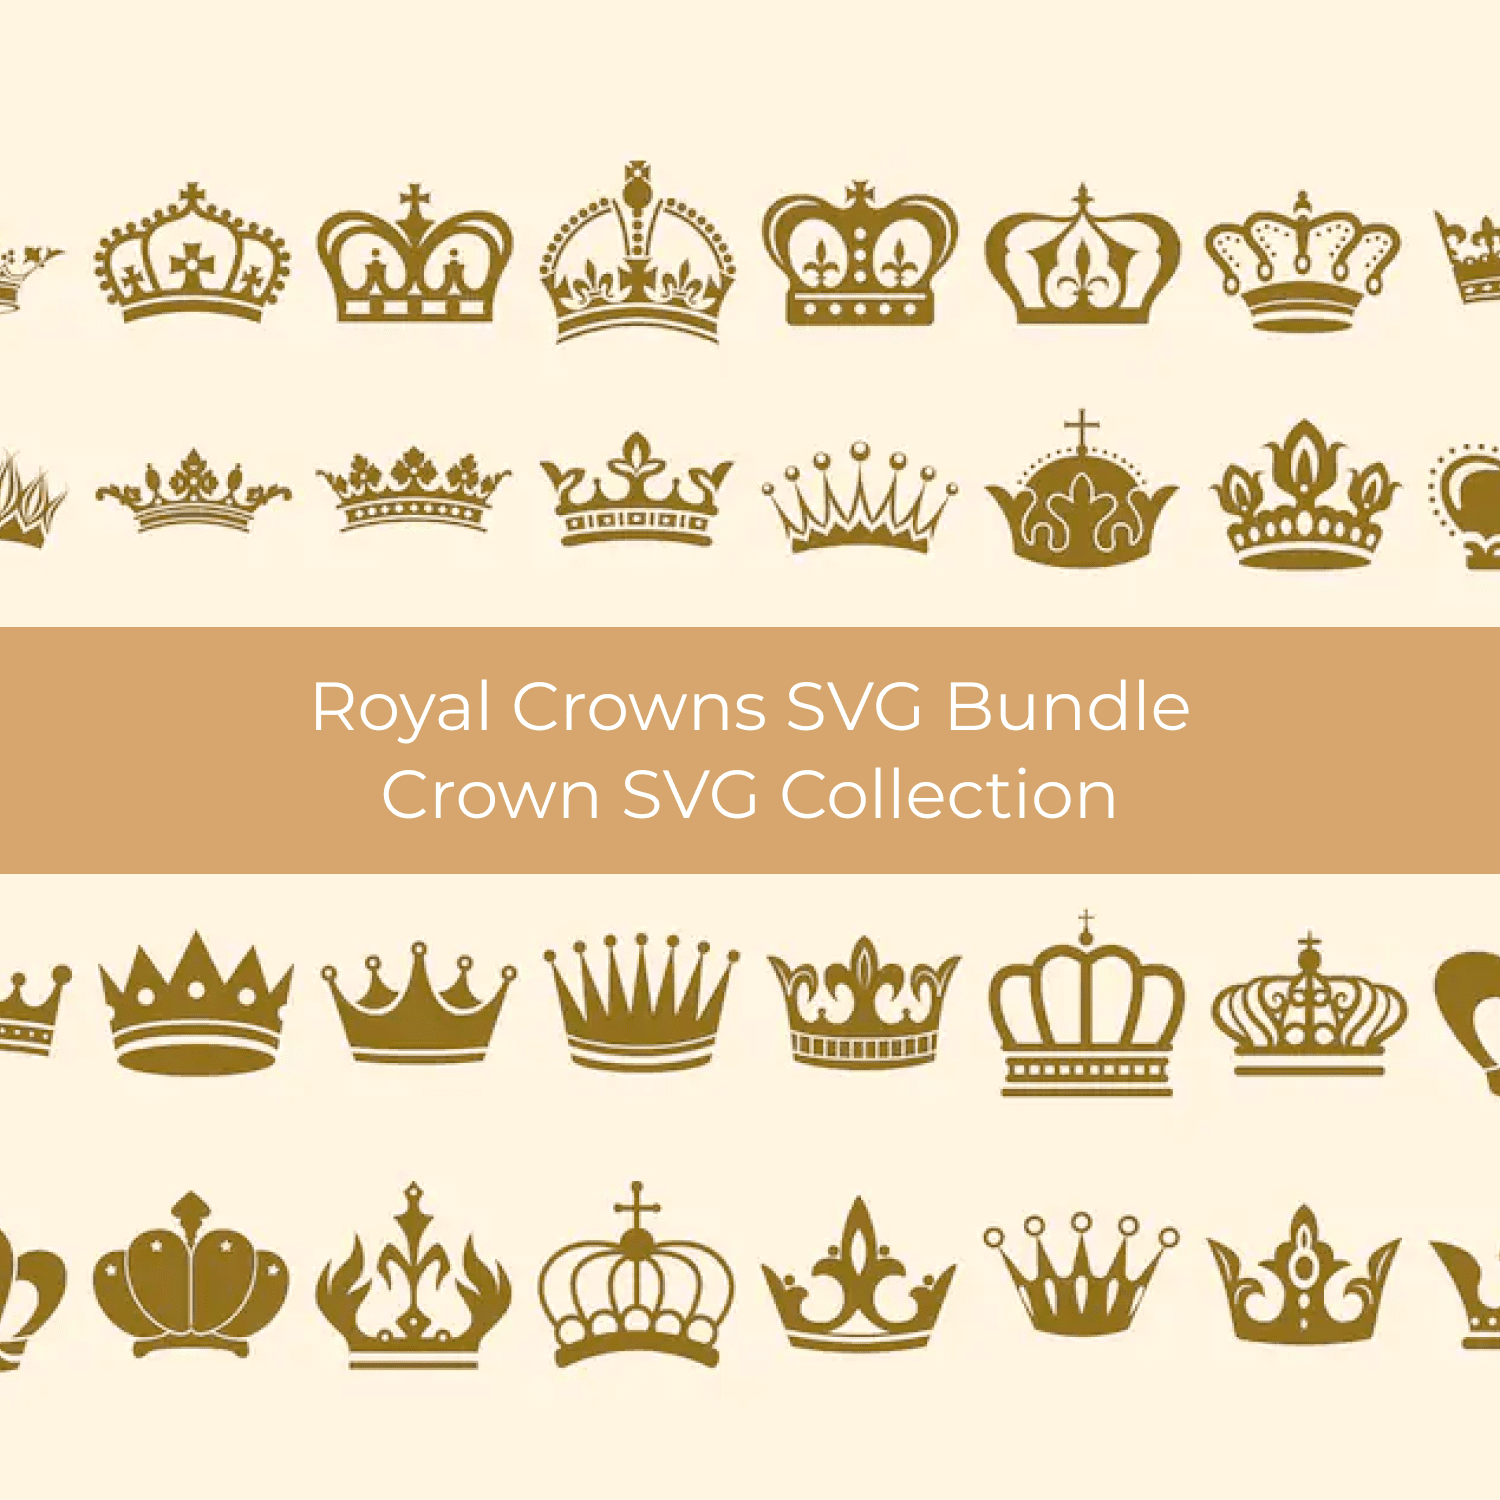 Crown SVG Collection.